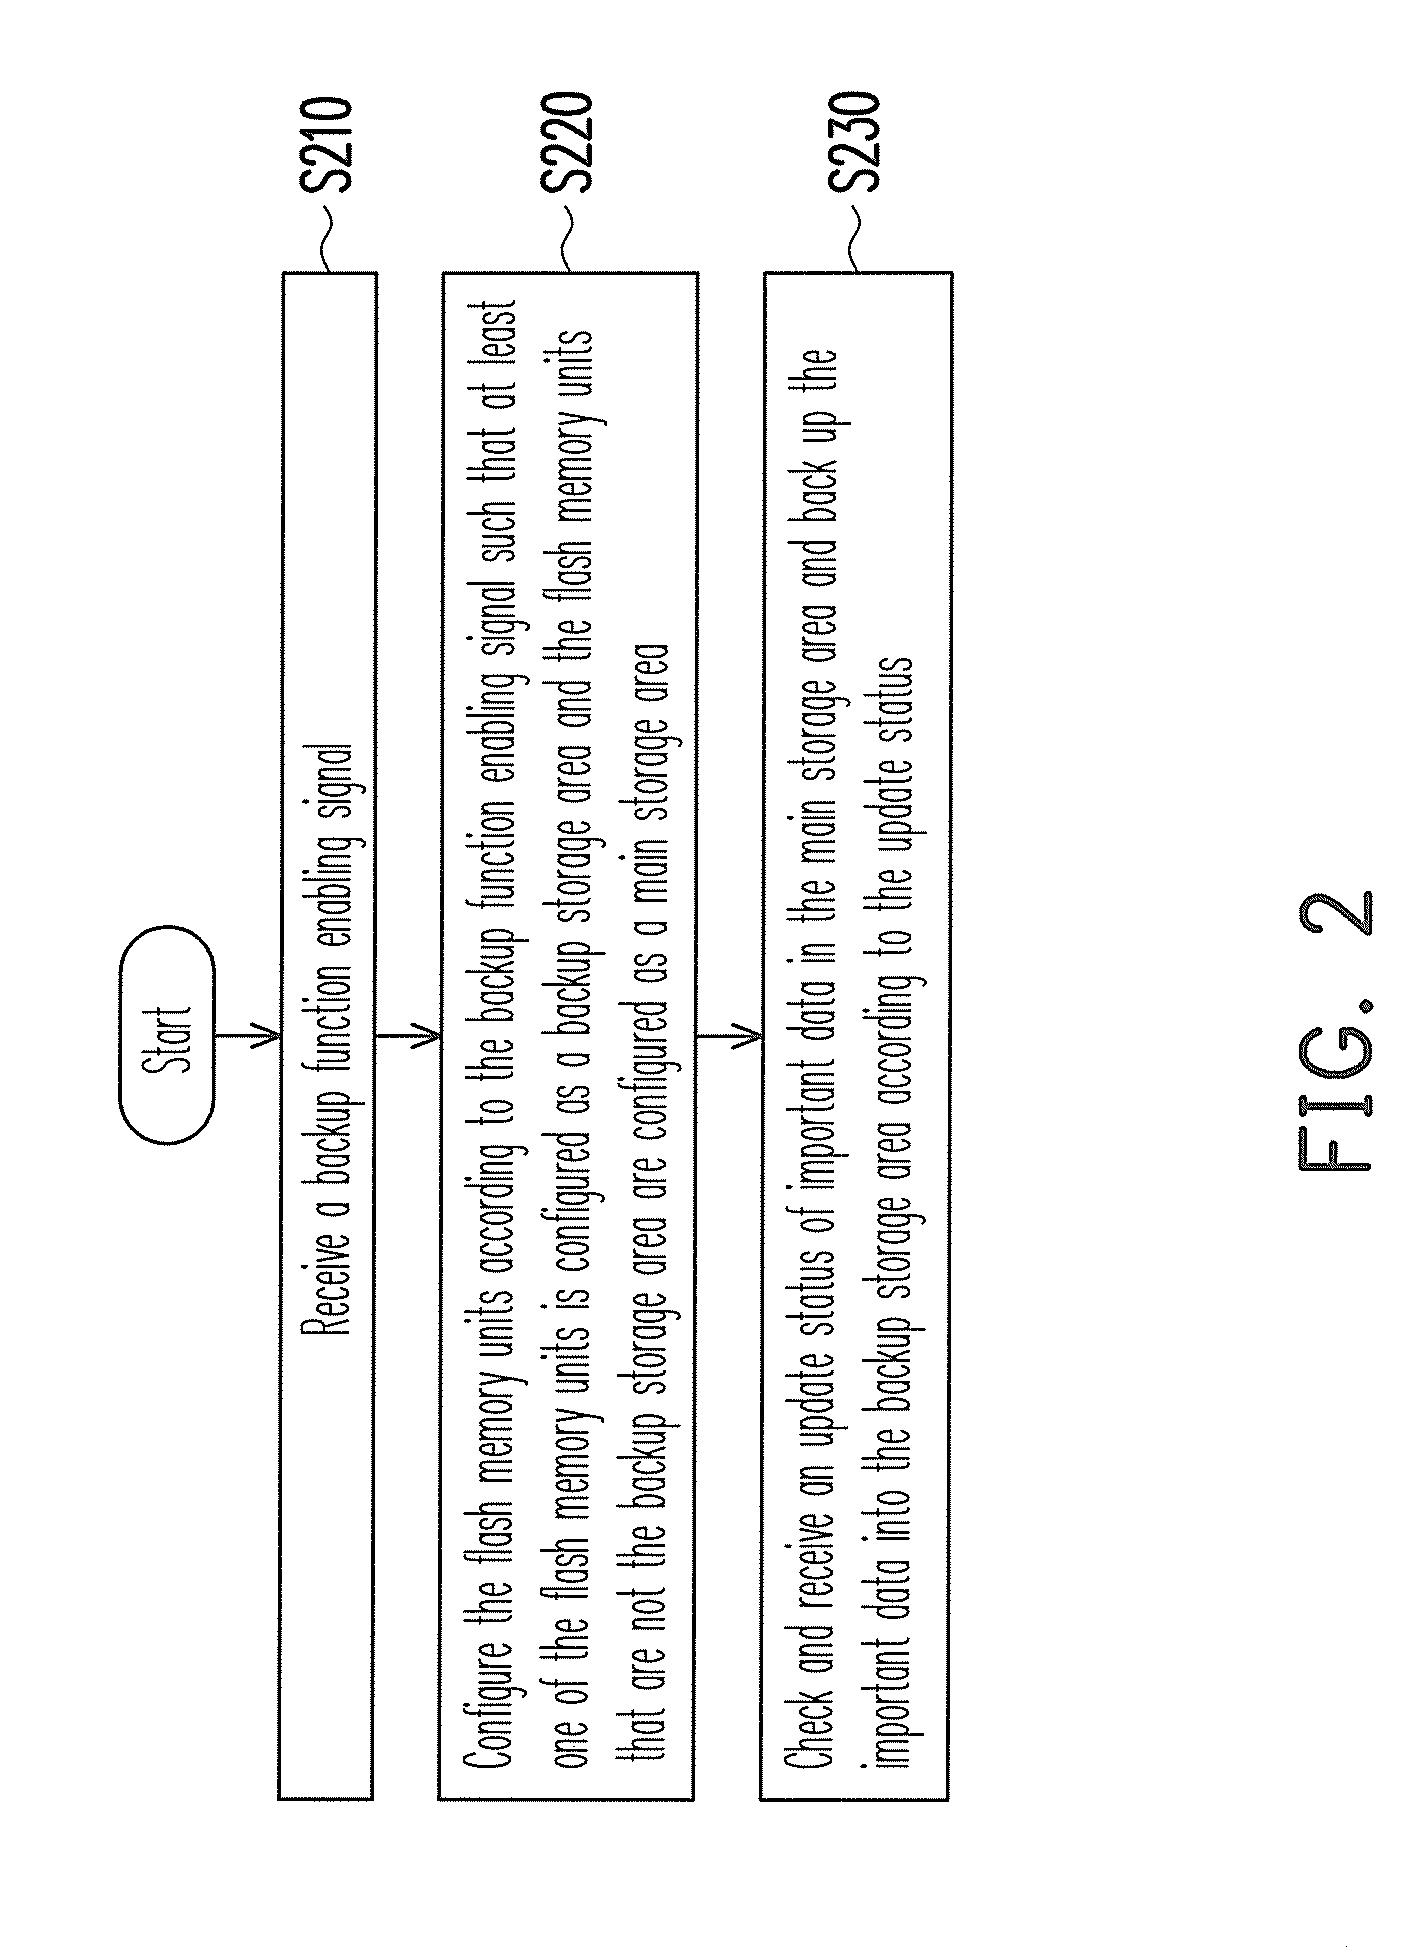 Data backup method for flash memory module and solid state drive